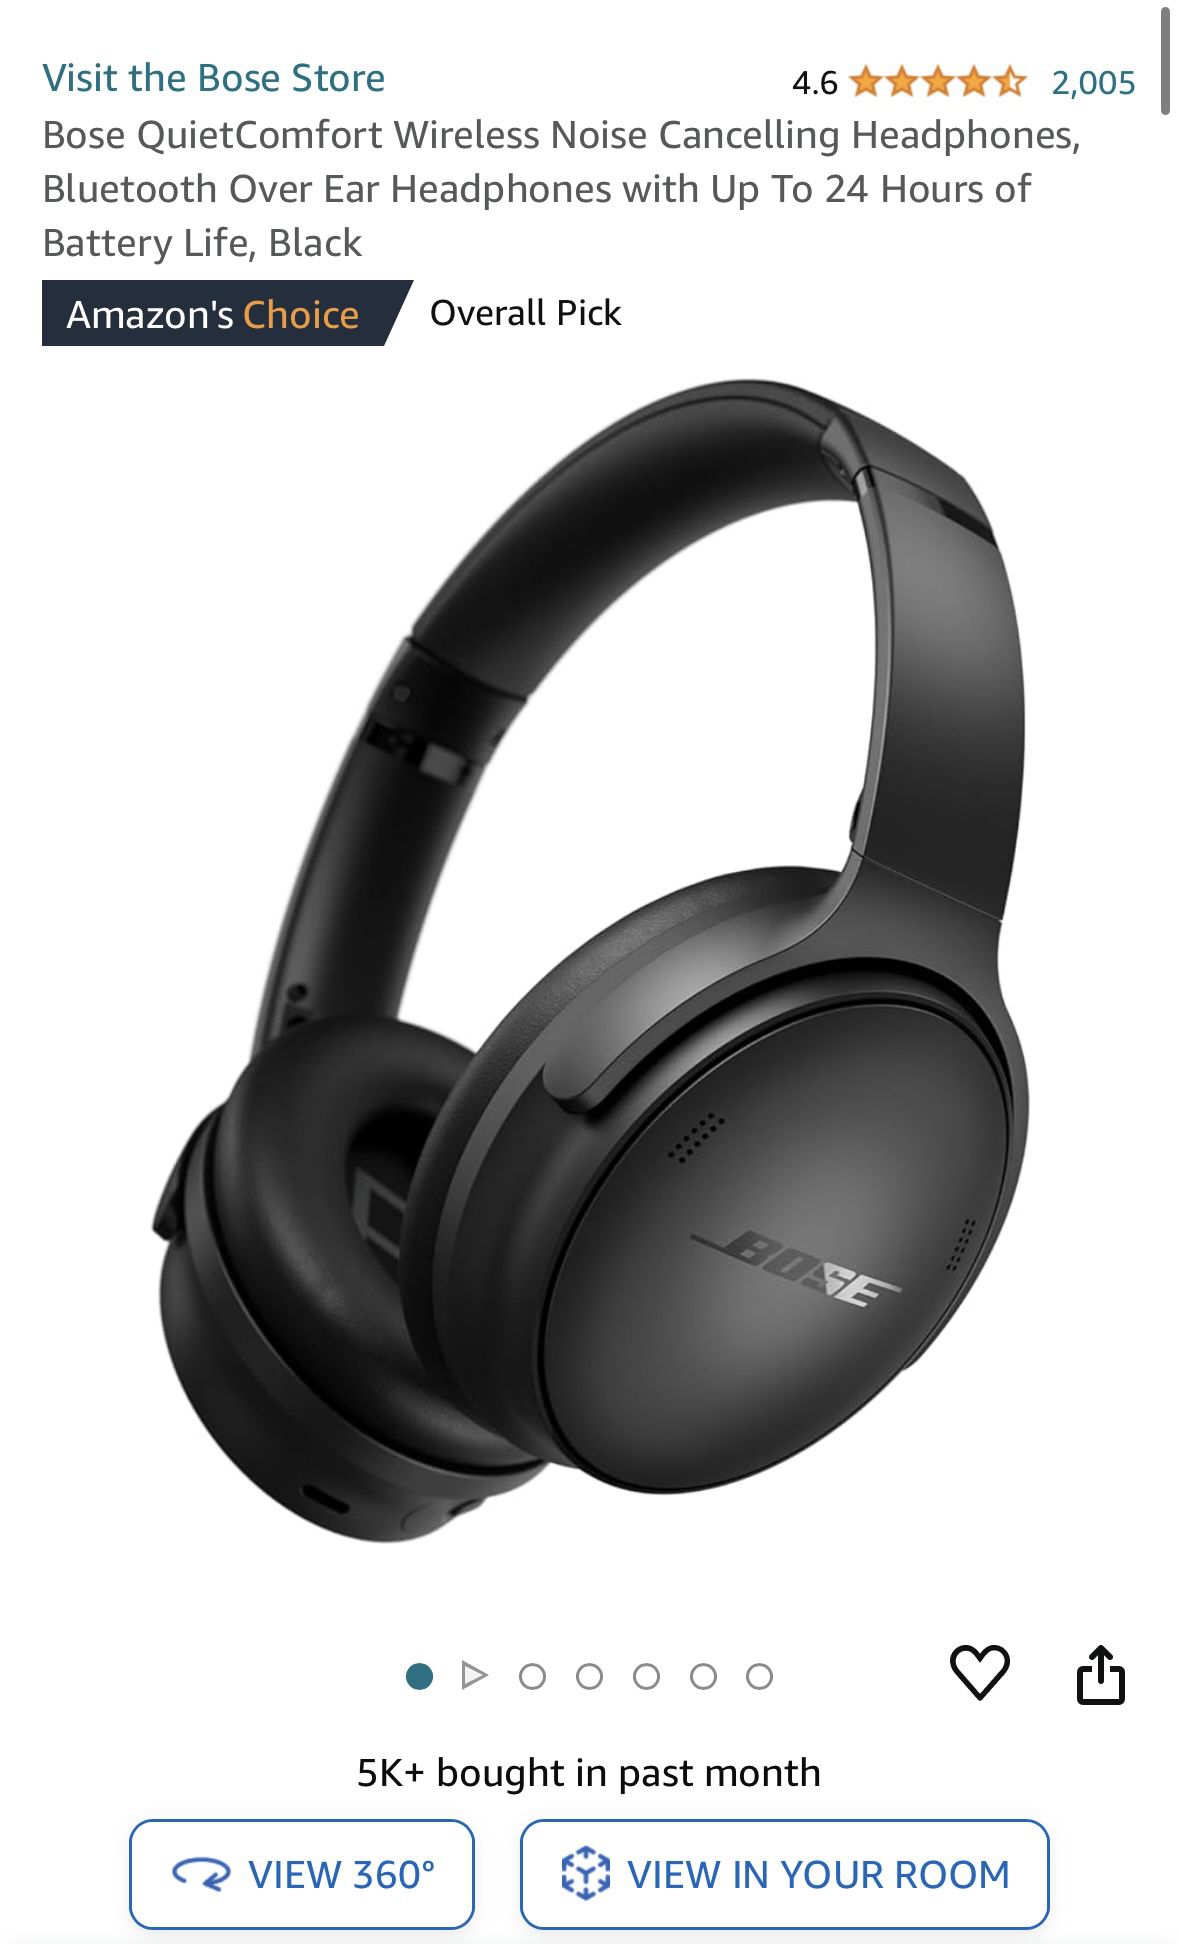 Bose QuietComfort Wireless Noise Cancelling Headphones, Bluetooth Over Ear Headphones with Up To 24 Hours of Battery Life